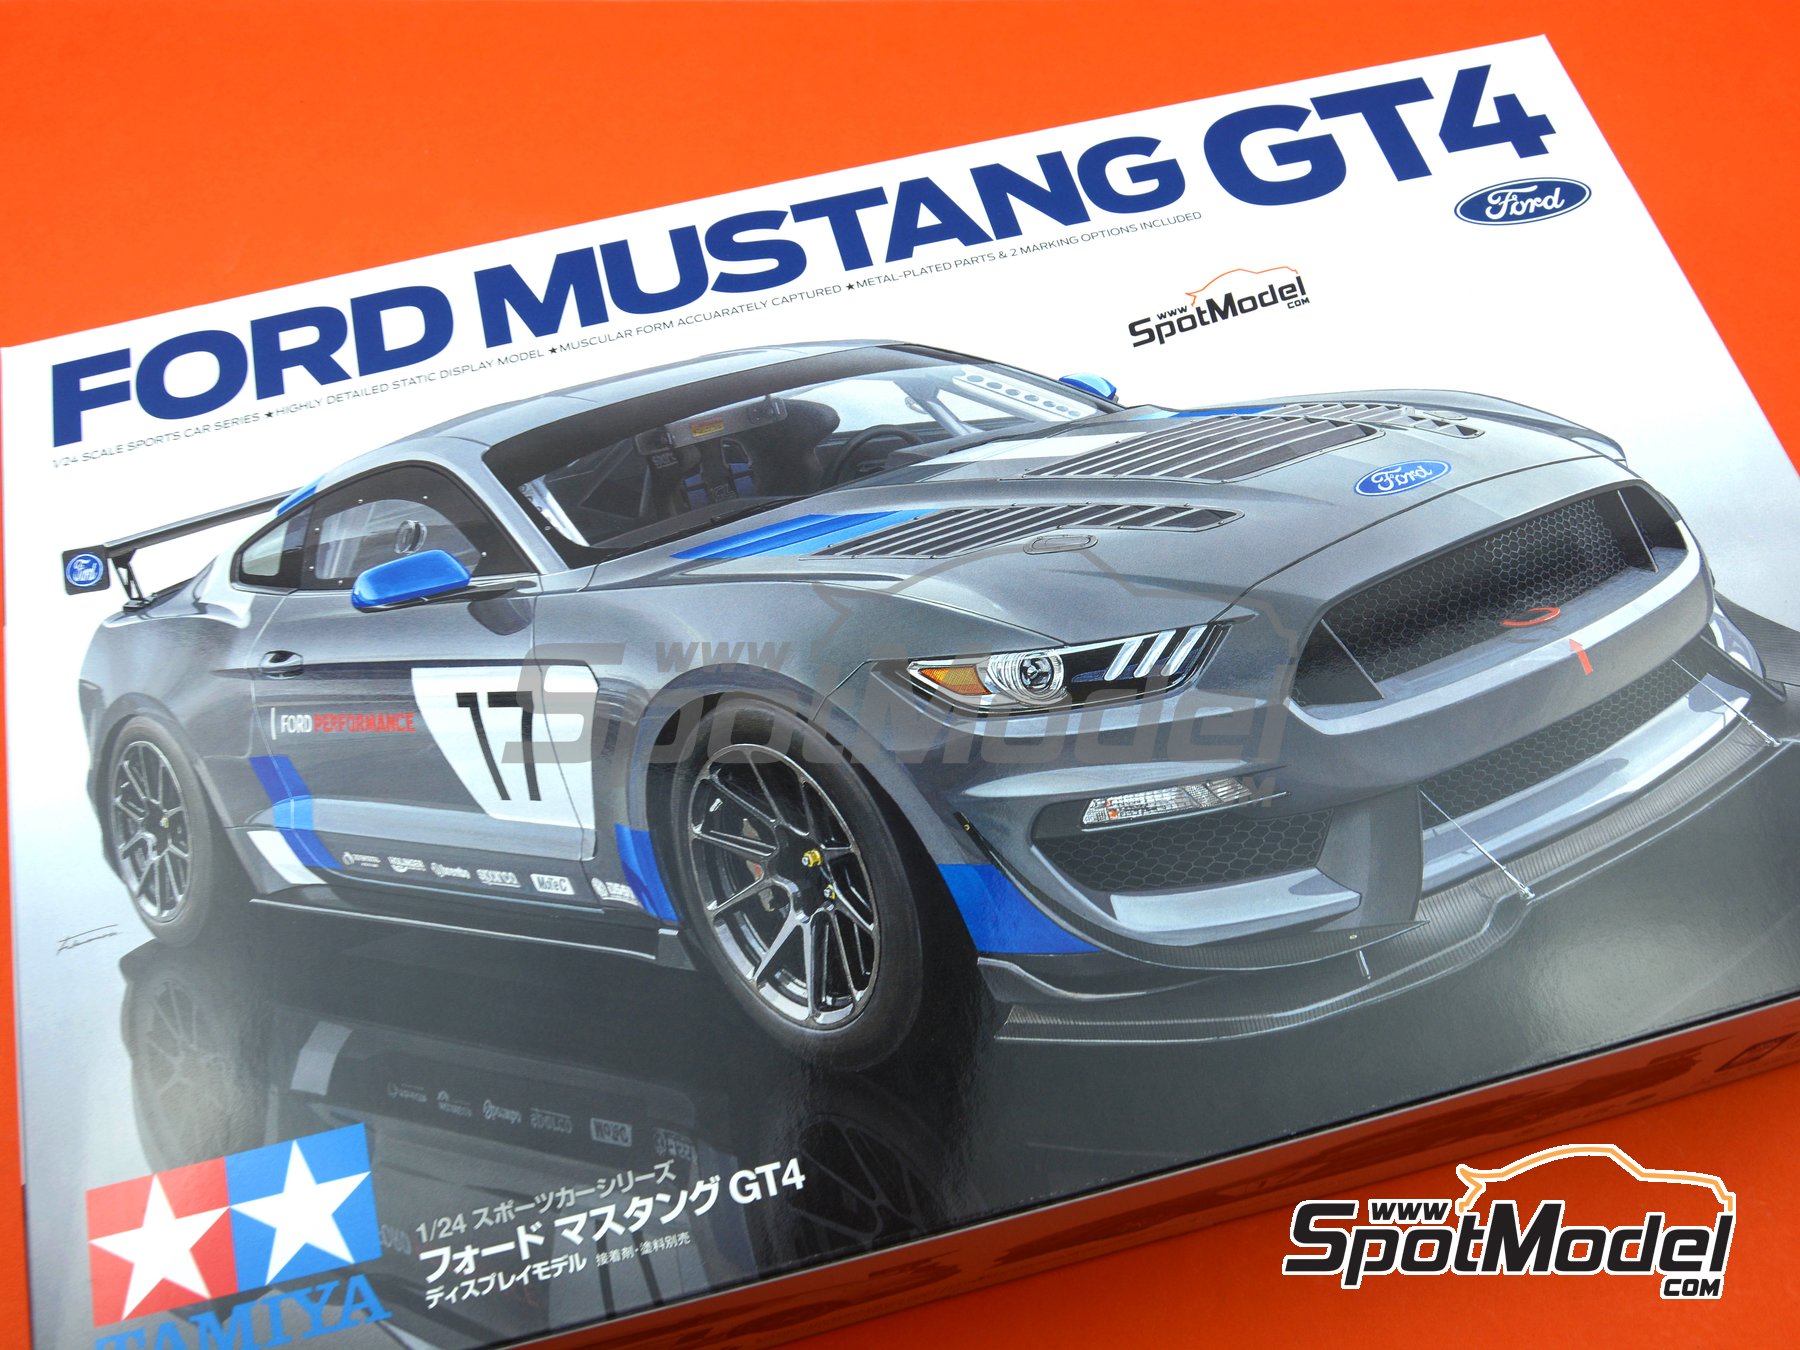 for sale online Tamiya 1/24 Ford Mustang GT4 24354 Grey